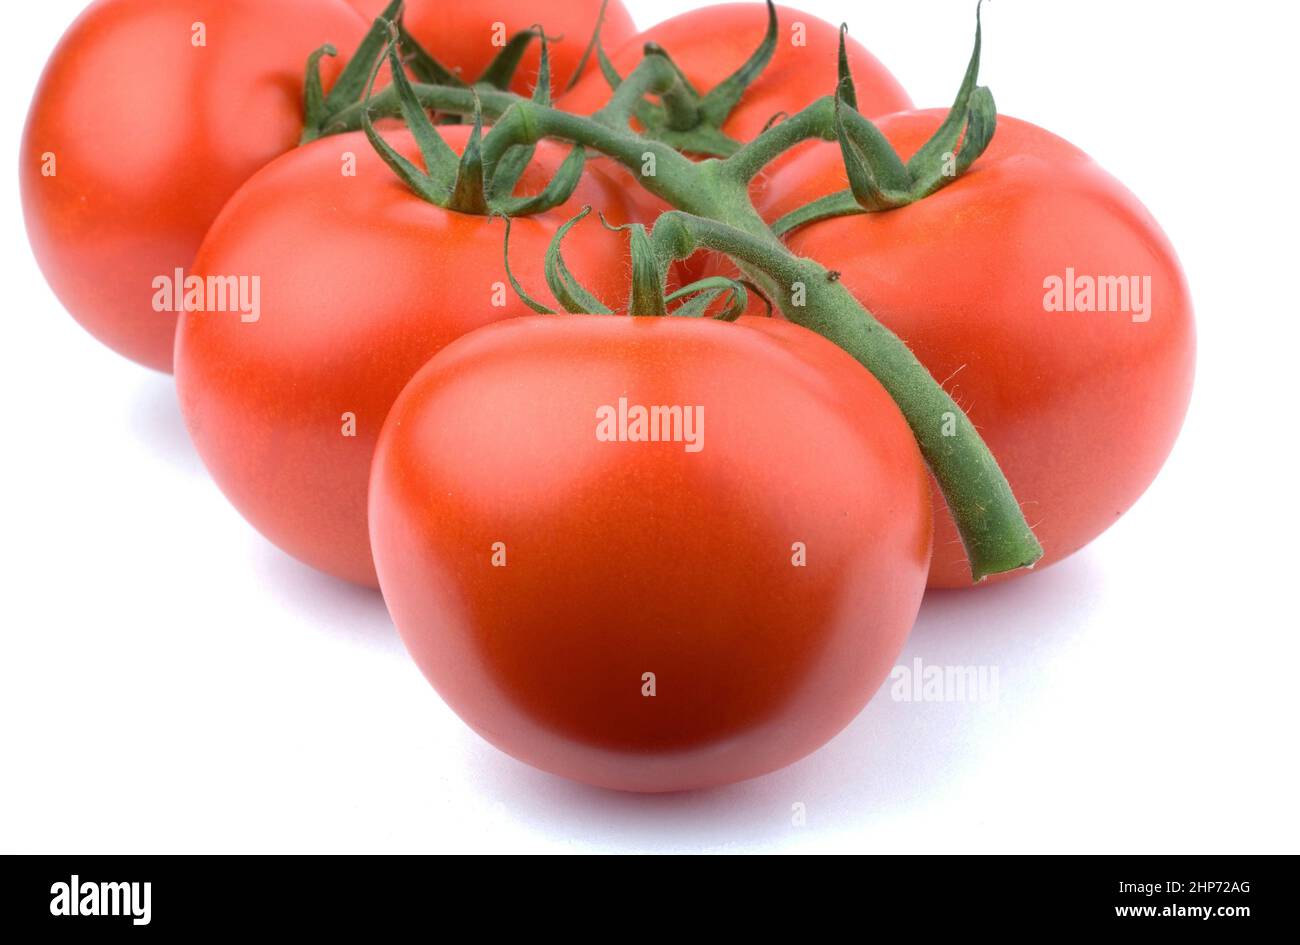 Photo of a tomato as a symbol of diet, fitness and organic Stock Photo